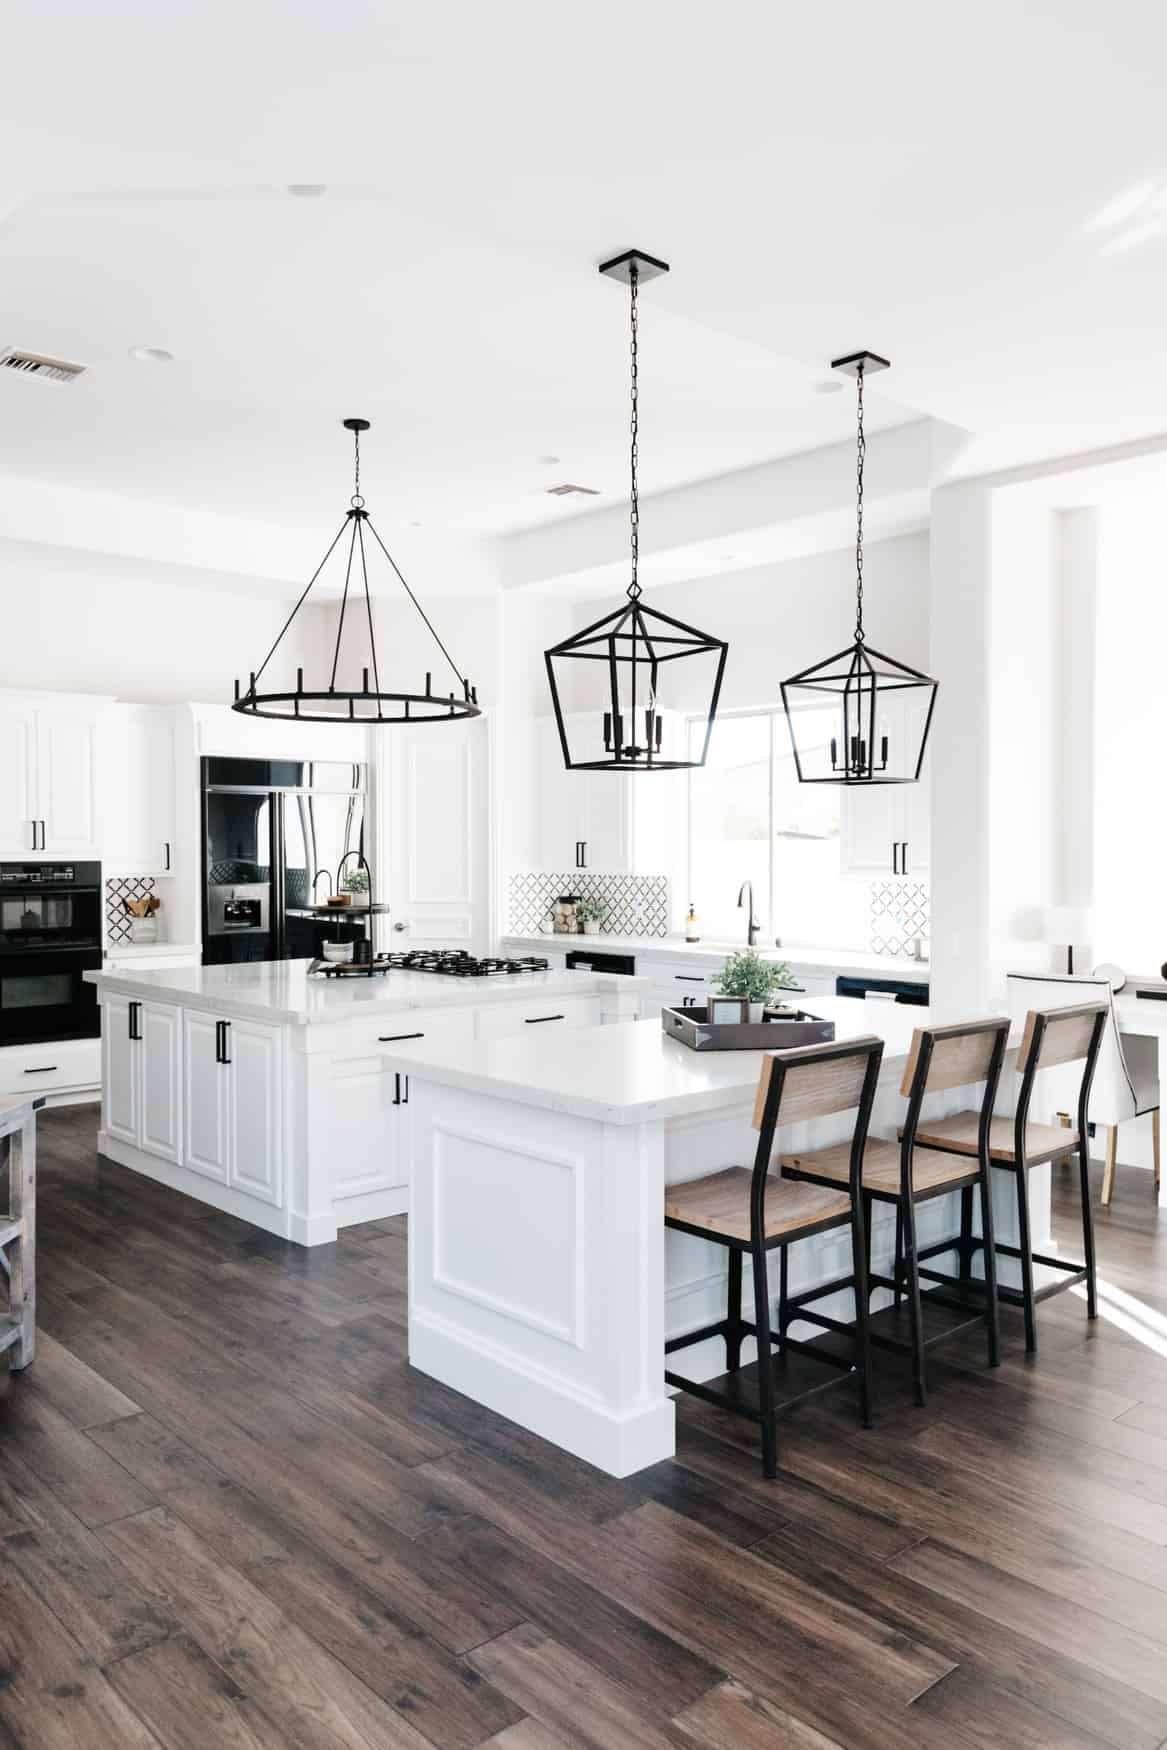 Kitchen with white cabinets, large black pendant lights and dark wood floors.